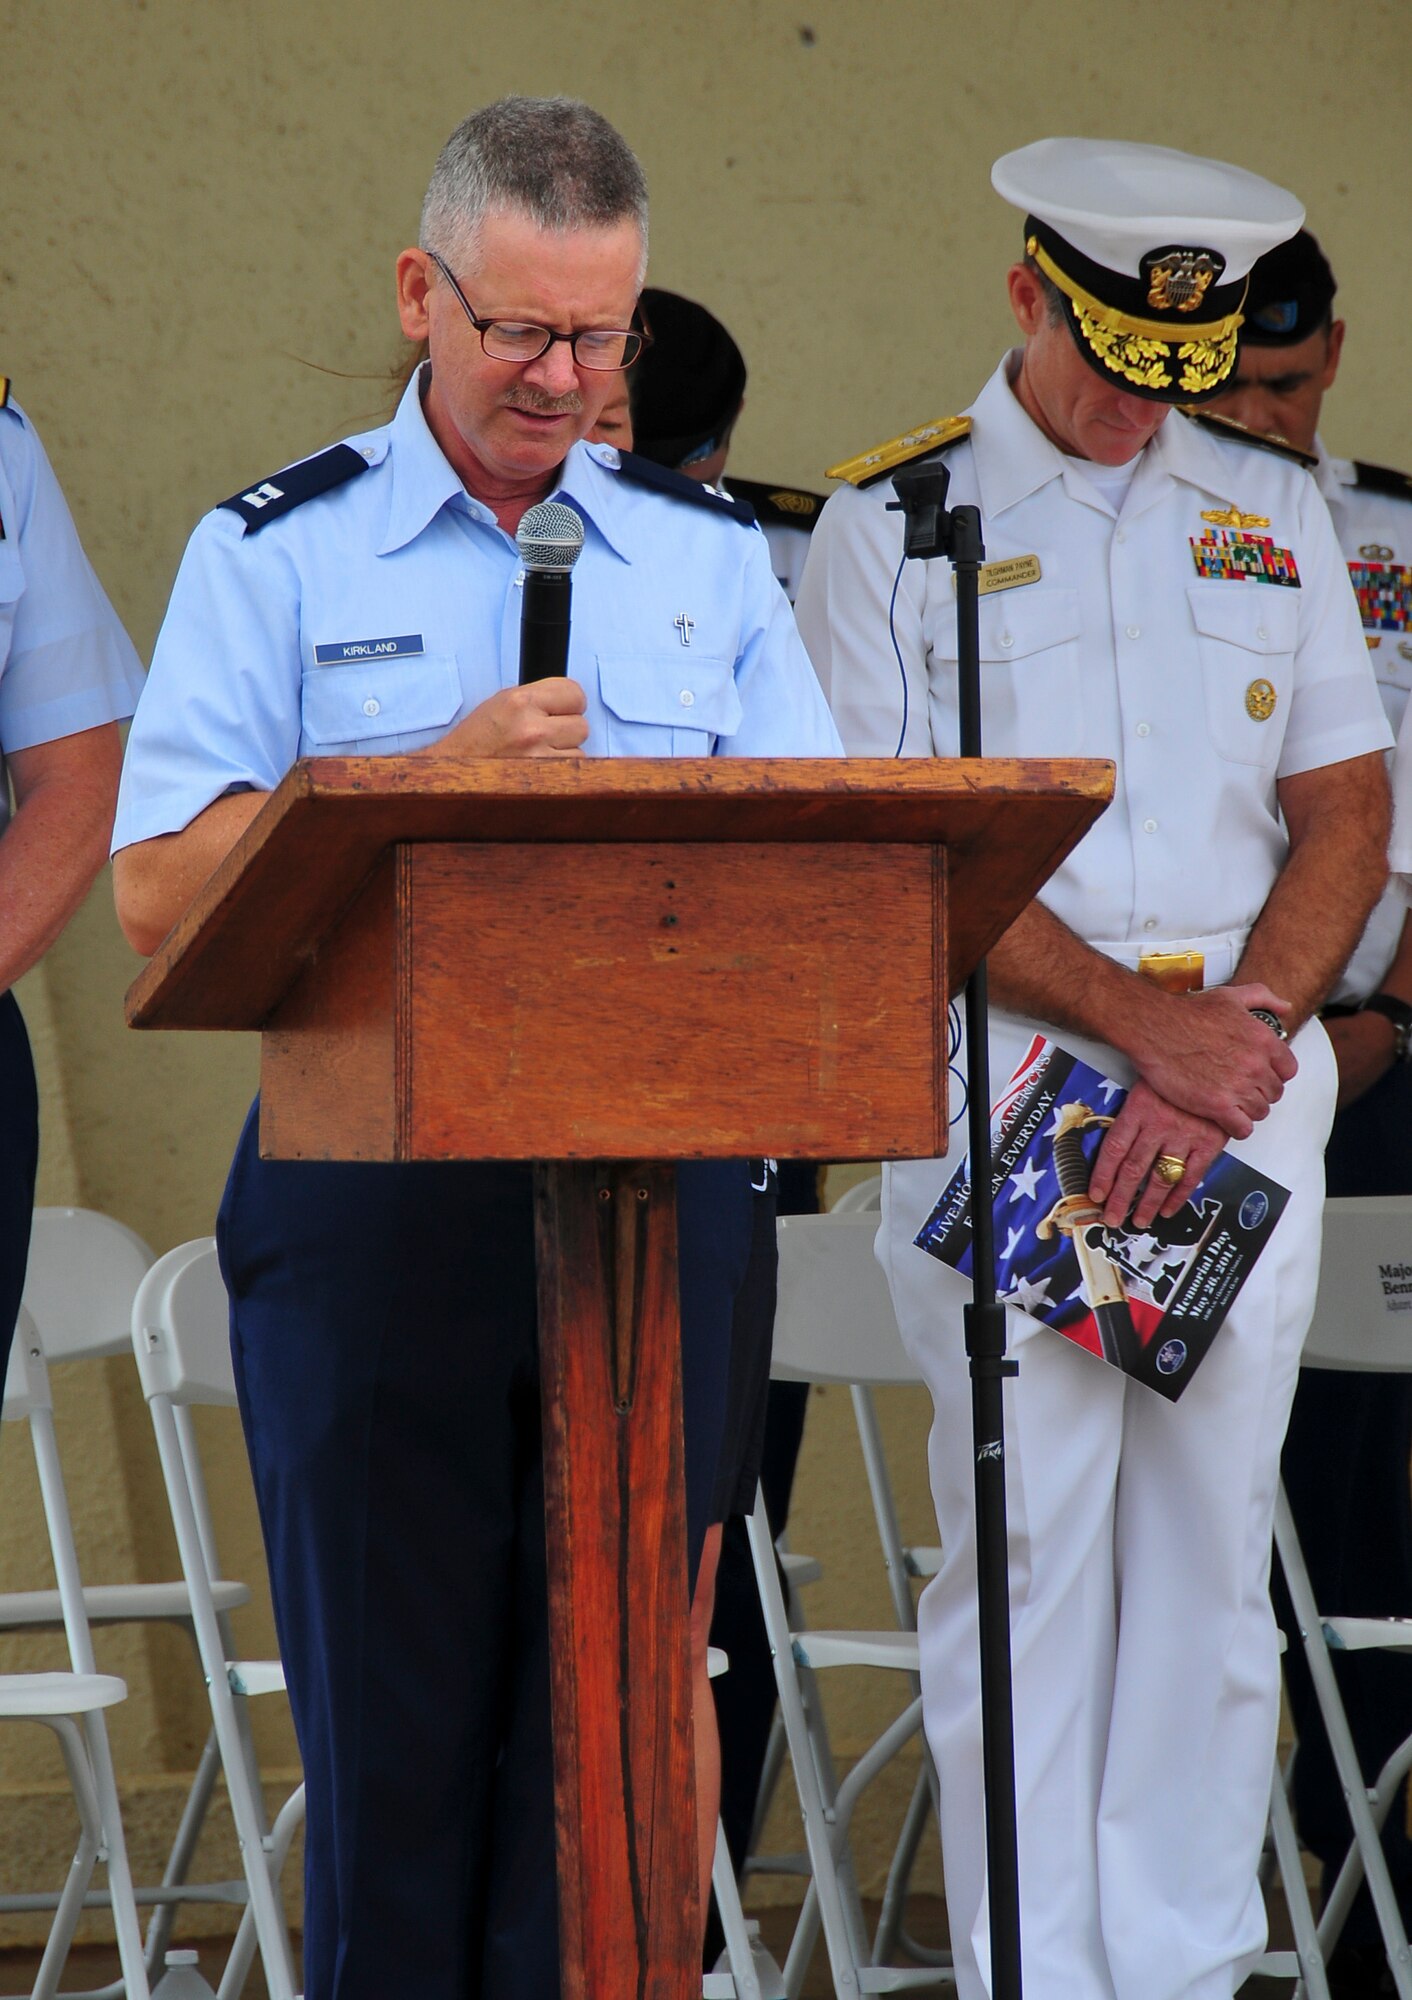 Chaplain (Capt.) William Kirkland, Guam Air National Guard, offers an invocation at the start of the Memorial Day Ceremony at the Guam Governor’s Complex in Hagåtña, May 26, 2014. Memorial Day was originally created as a way to remember Union and Confederate soldiers who died during the American Civil War, but it has grown since then as a way to honor the more than 1.1 million American service members who have been killed in action. (U.S. Air Force Photo by Staff Sgt. Brok McCarthy/Released)